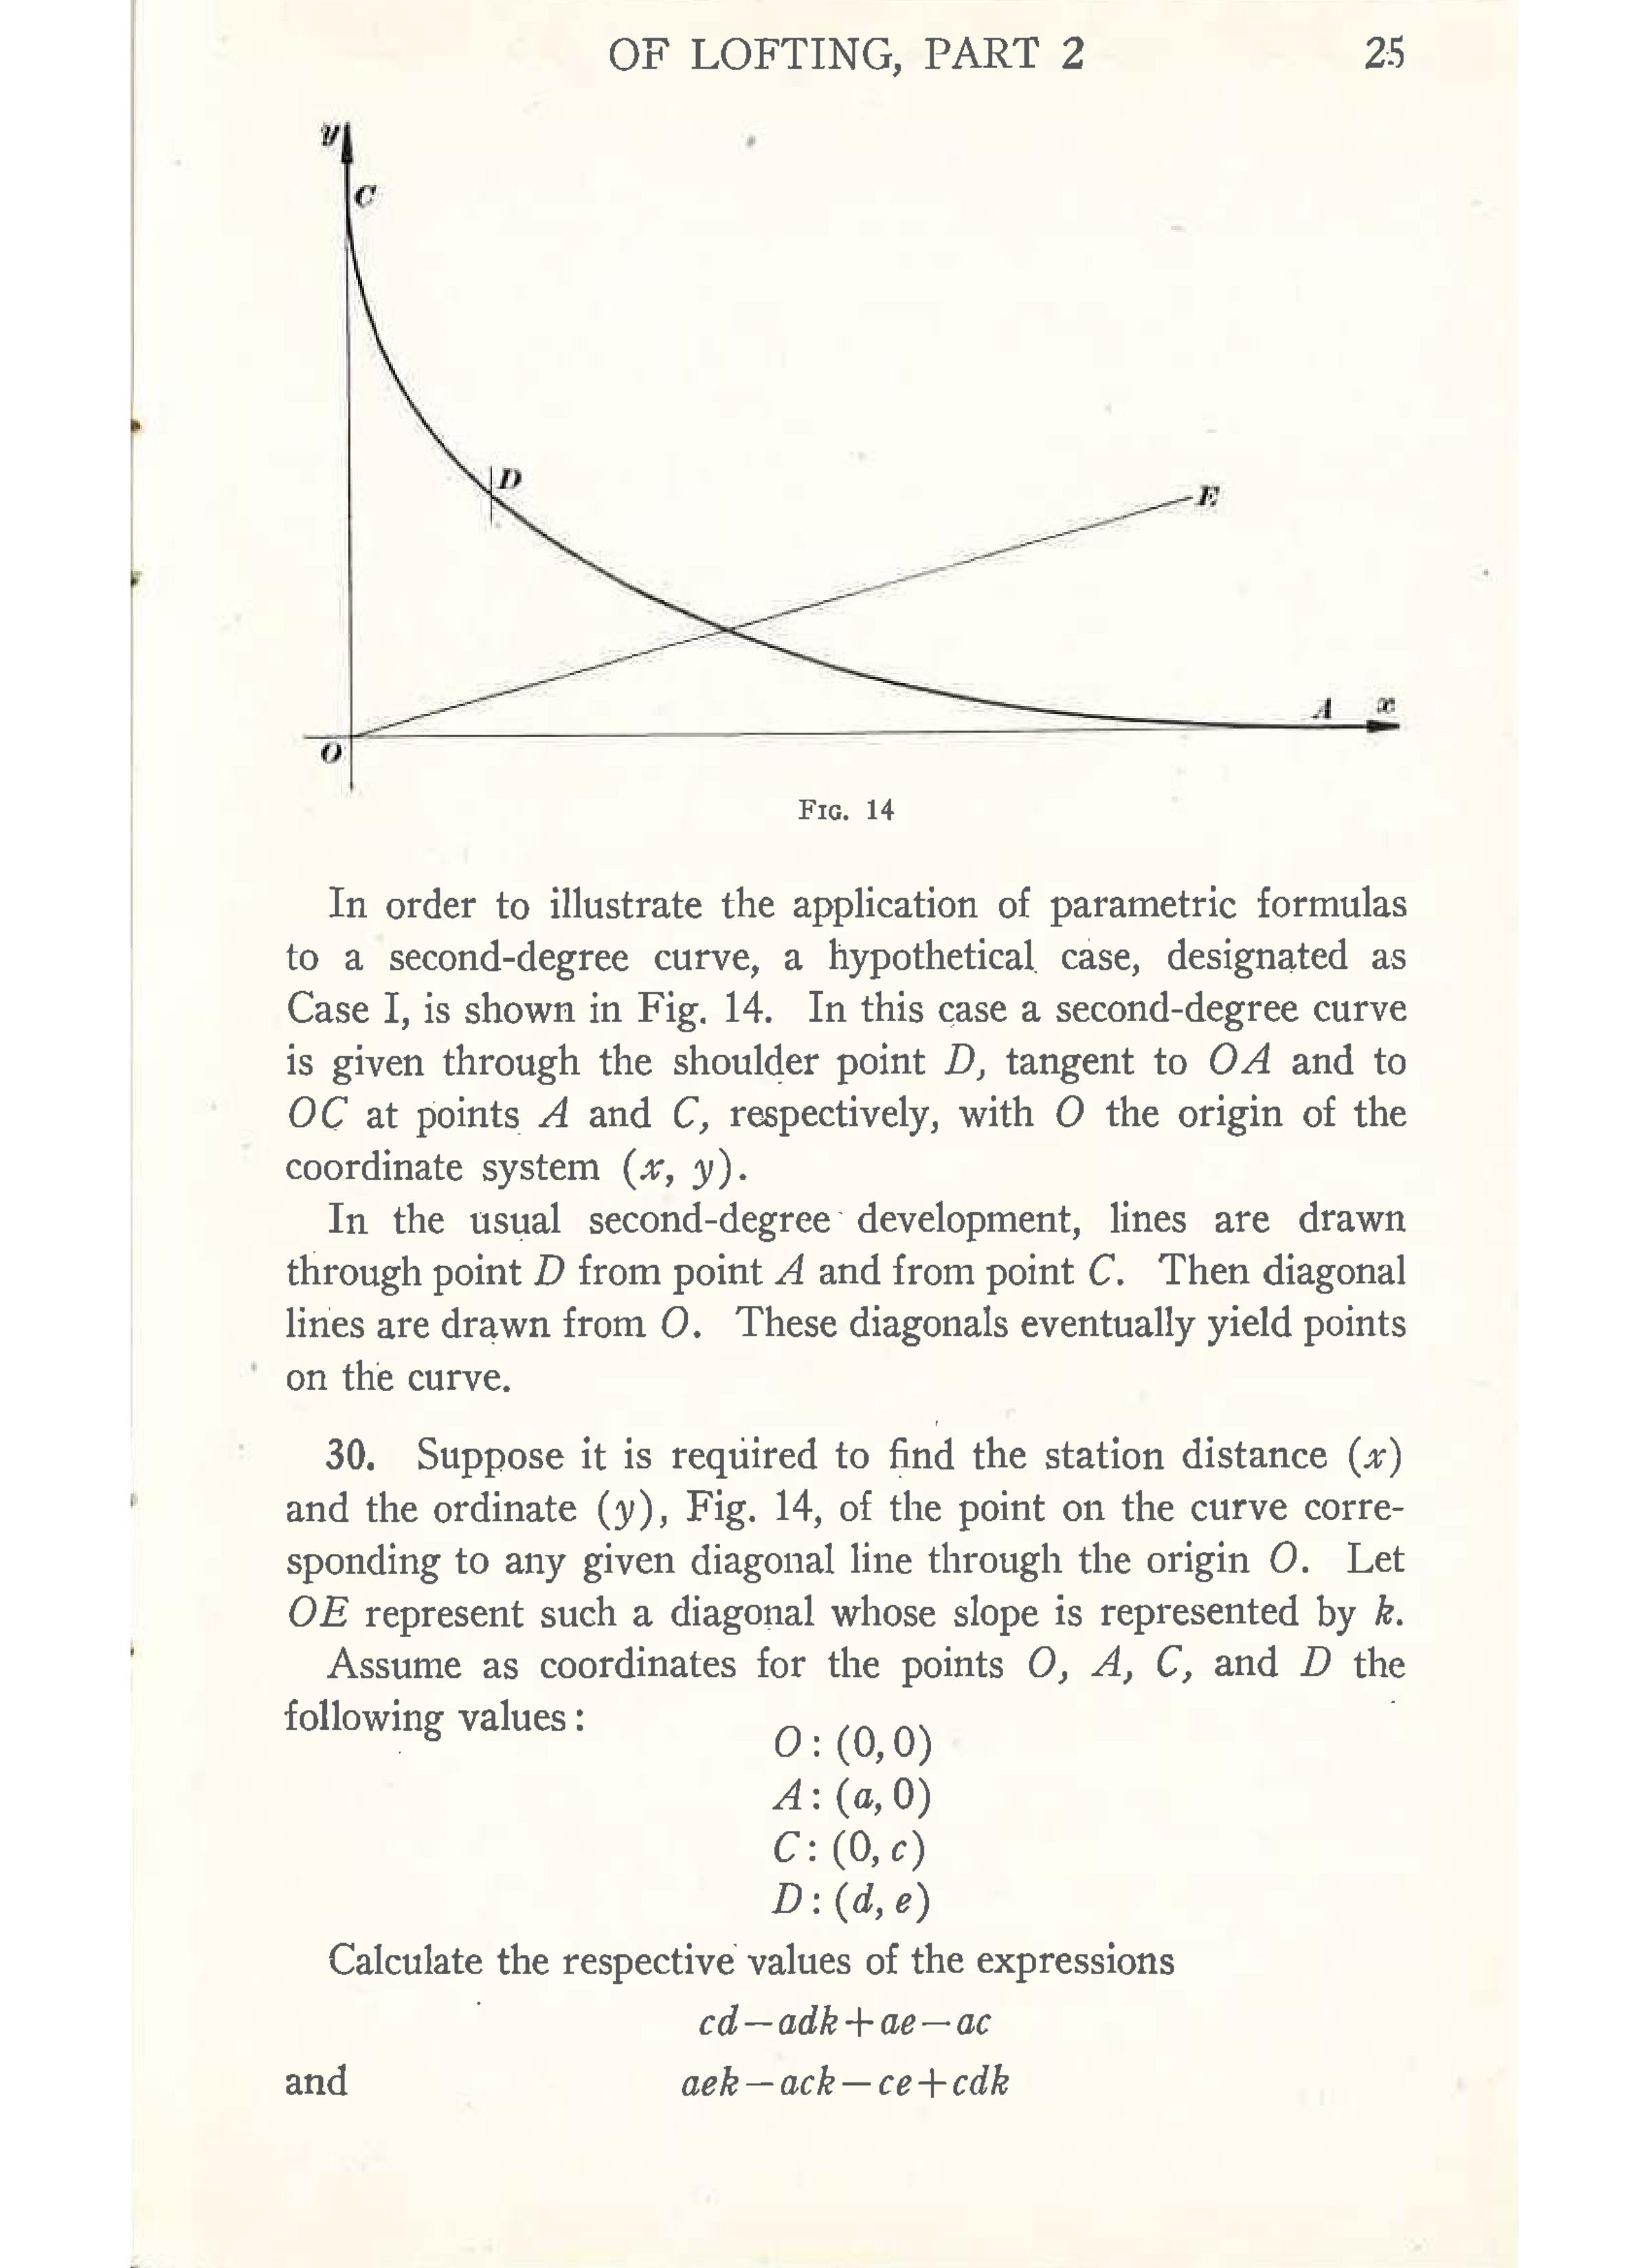 Sample page 27 from AirCorps Library document: Mathmatical Technique of Lofting - Part 2 - Bureau of Aeronautics